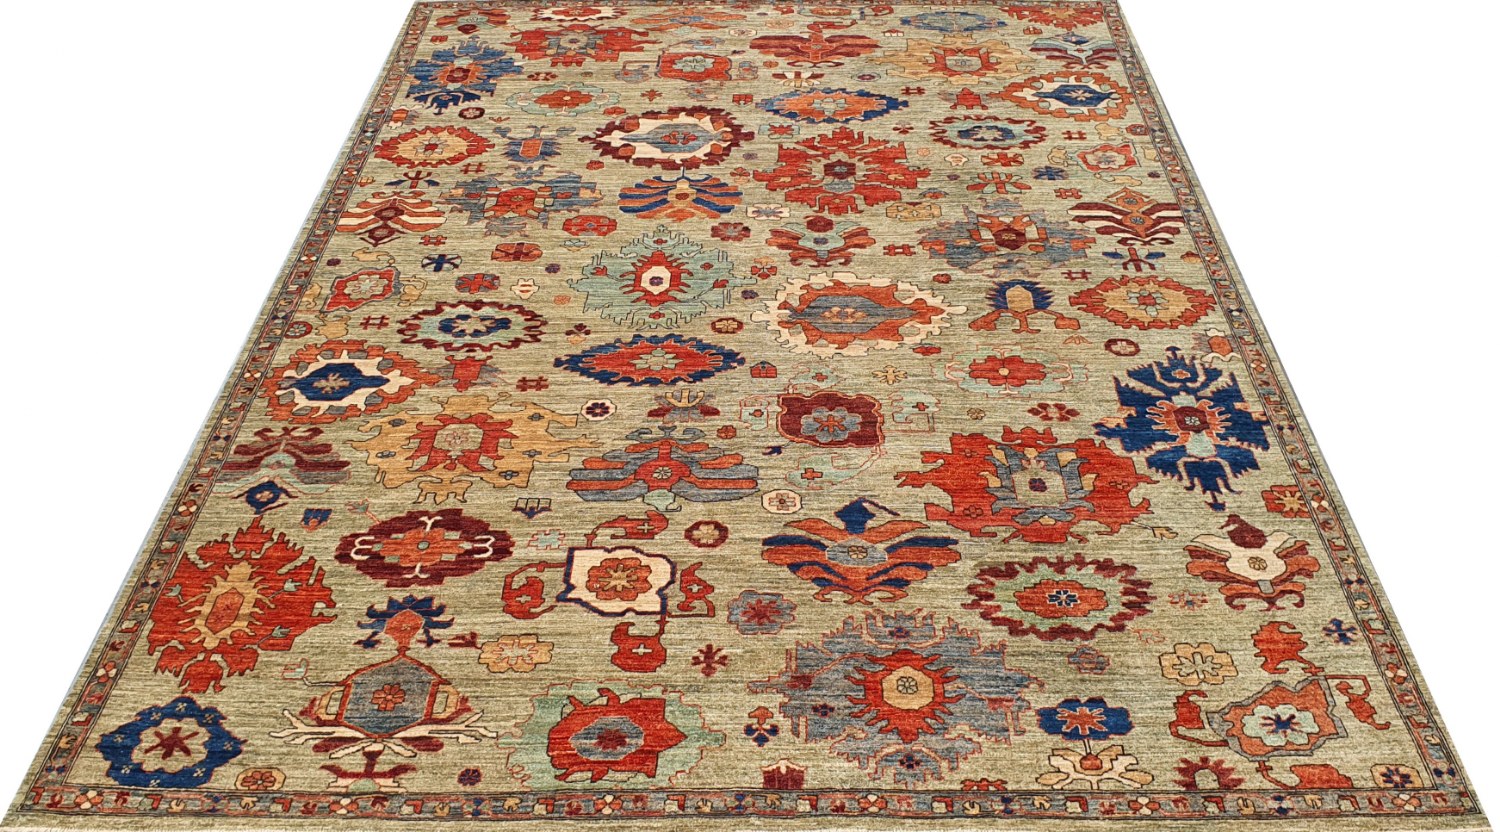 9x12 Aryana & Antique Revivals Hand Knotted Wool Area Rug - MR028166